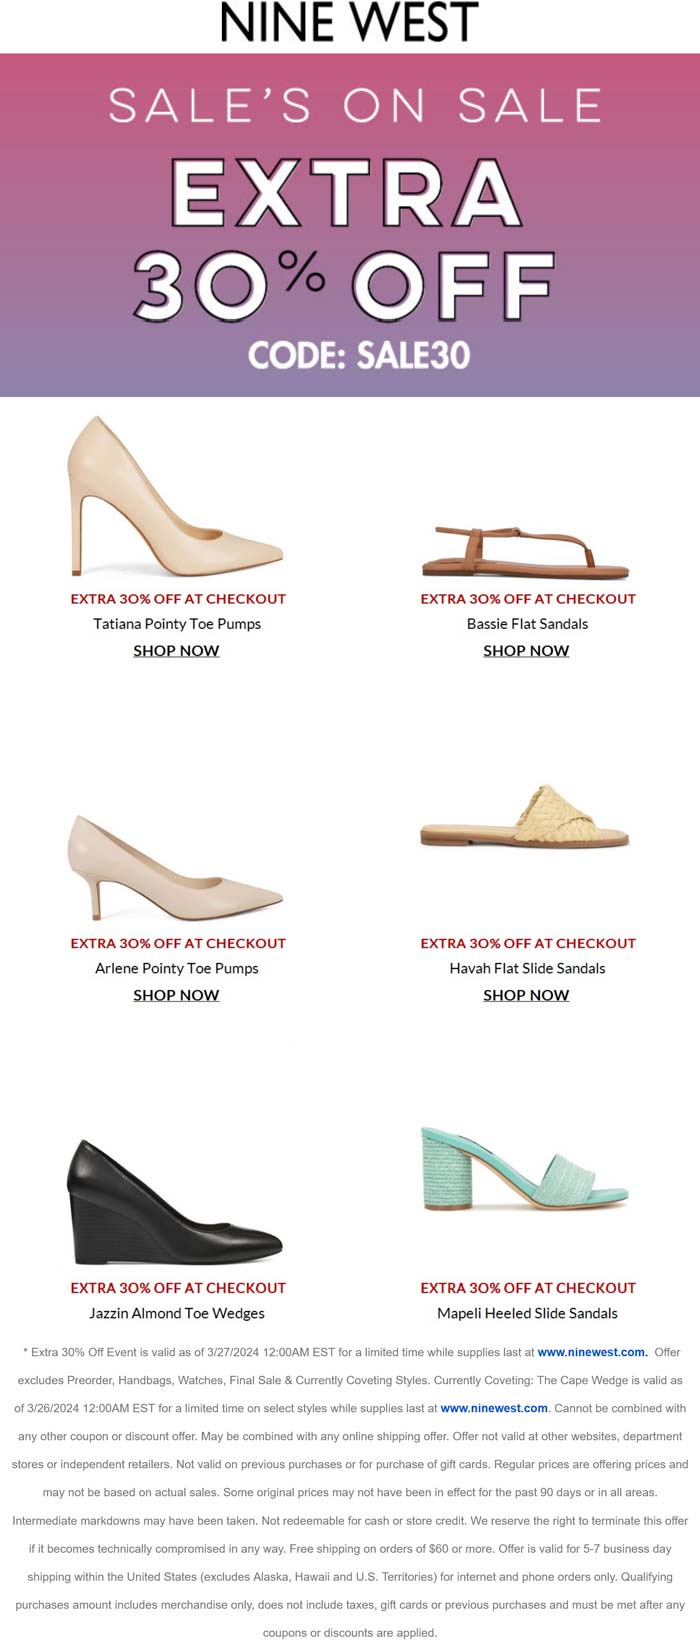 Nine West stores Coupon  Extra 30% off sale items at Nine West via promo code SALE30 #ninewest 